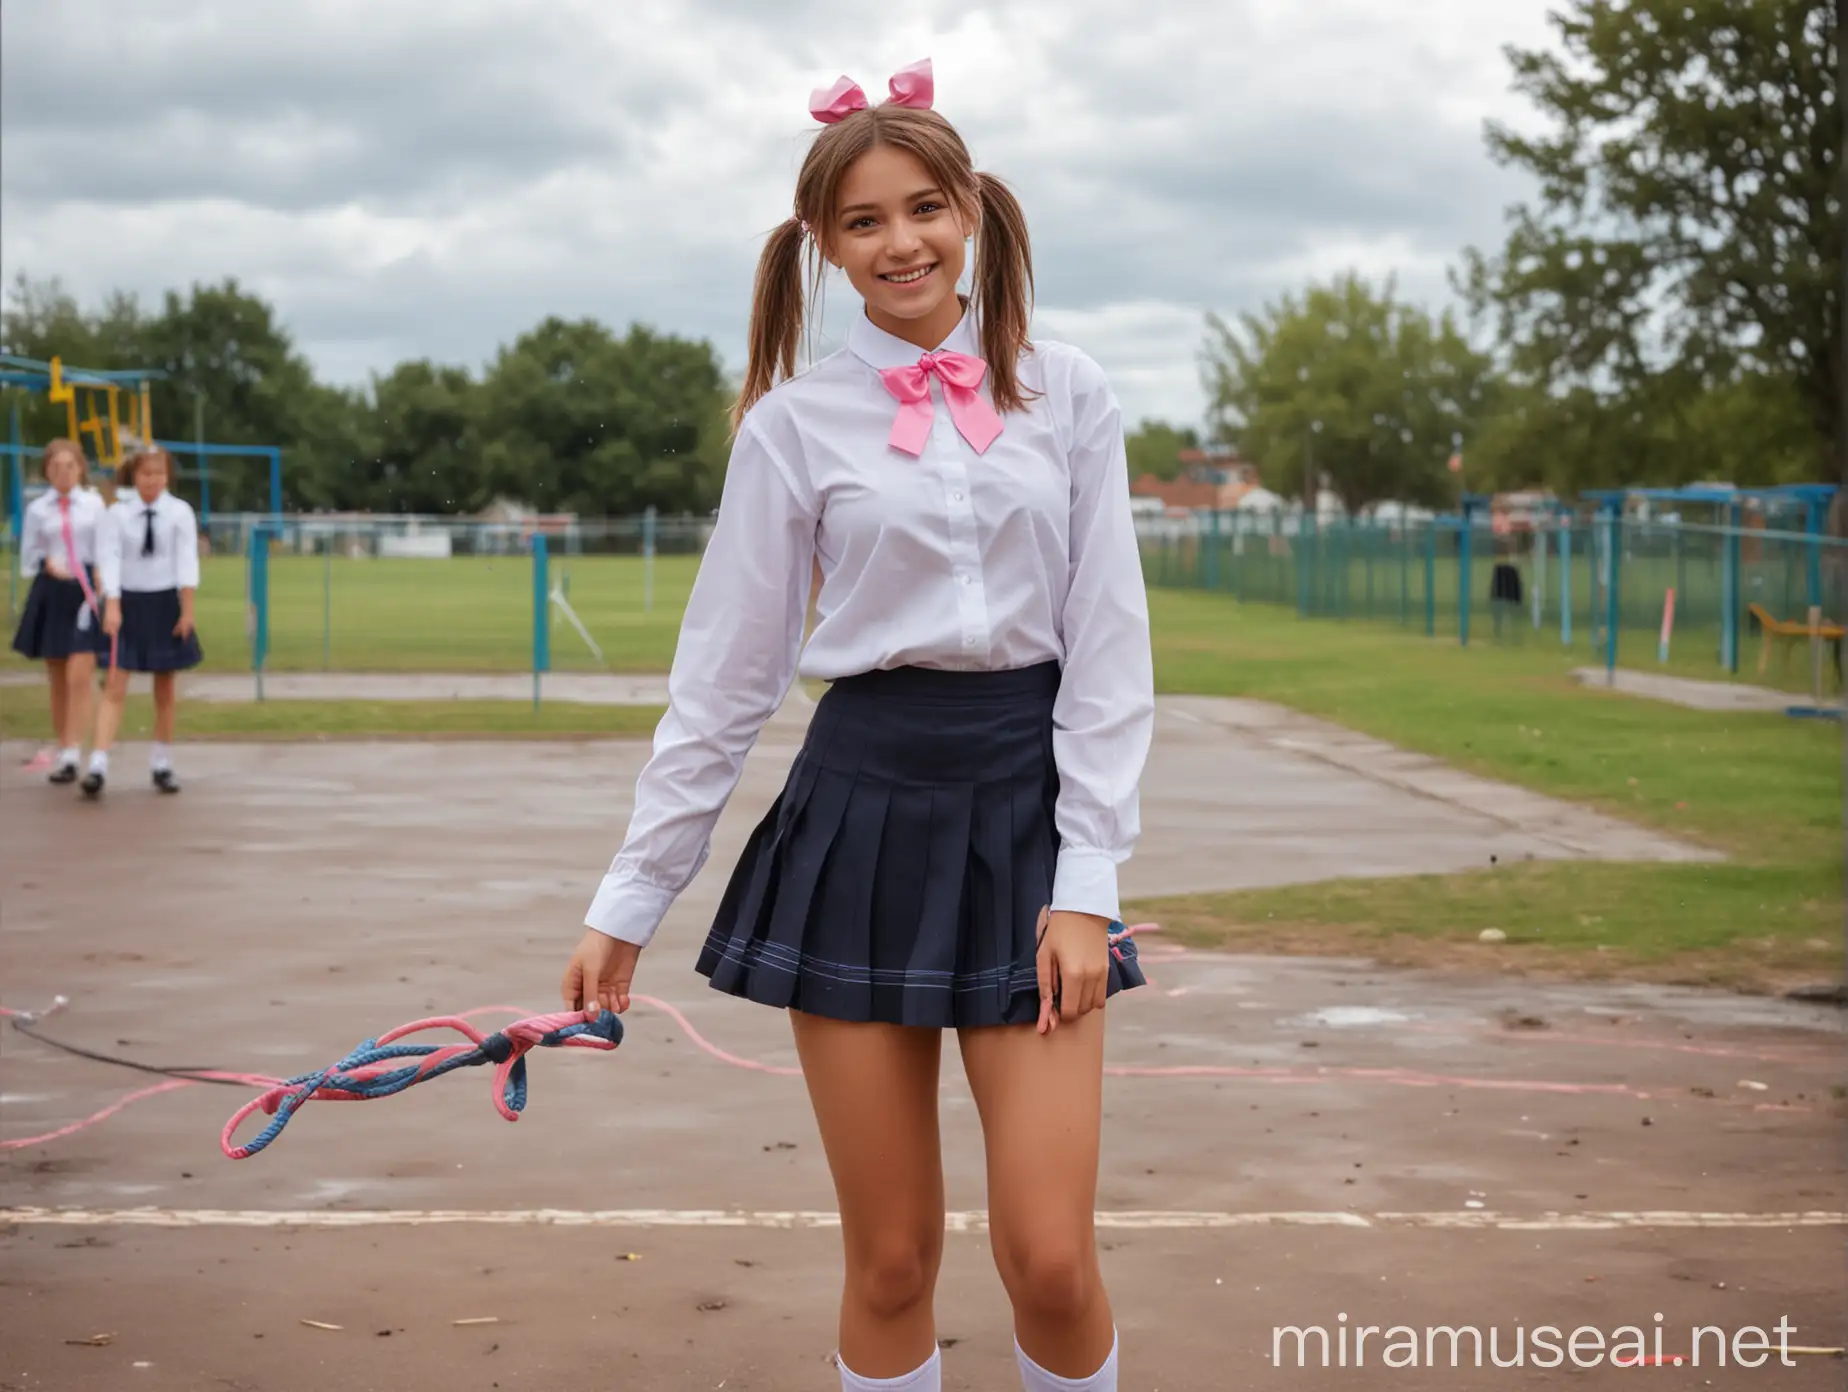  young pretty girl in school uniform. very large breats, one breast exposed, smiling, slim, in playground, short pleated skirt, brown hair, brown eyes, one earing, pink bow in hair, holding a skipping rope, ground is wet, cloudy sky, school friends in background, blue choker,